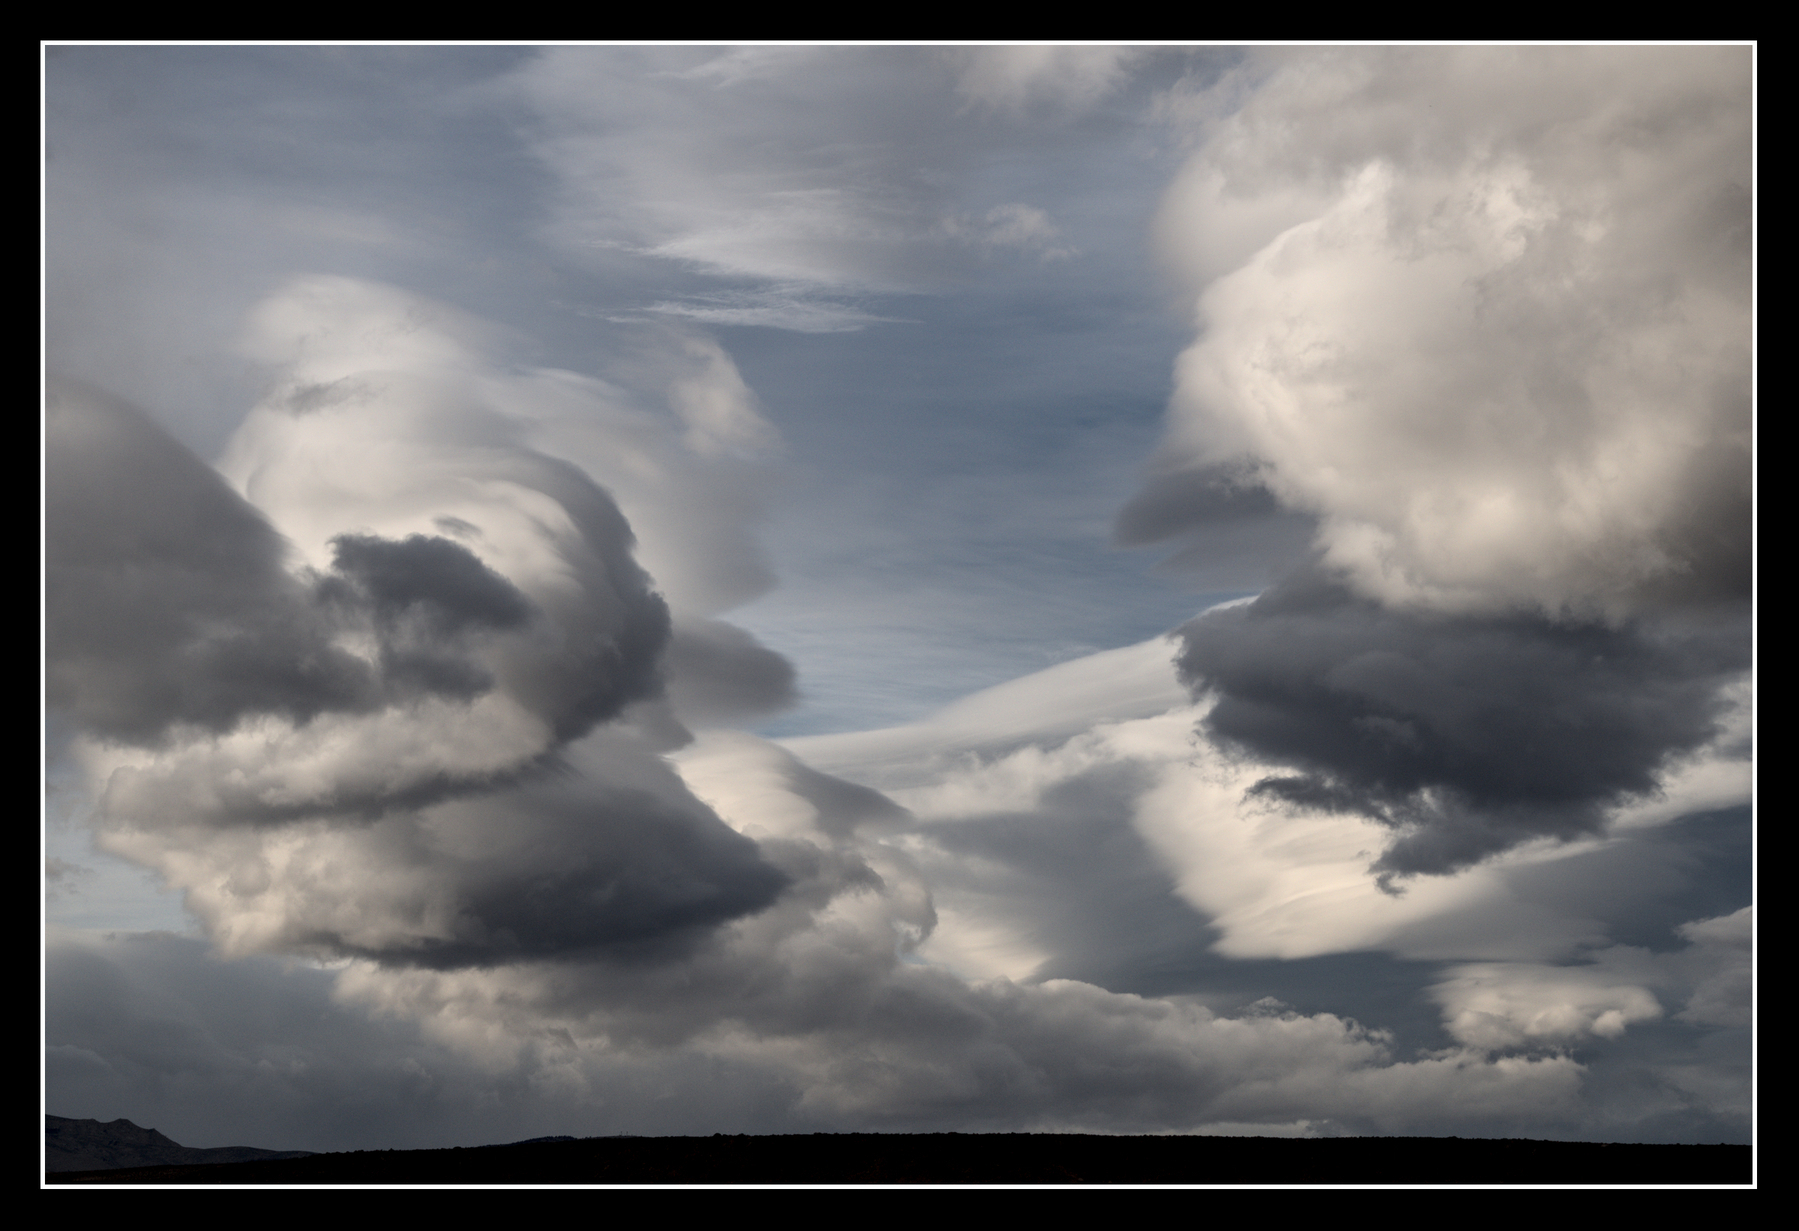 A large, varied cloud formation fills the sky, but with gaps so blue can be seen behind. There are smooth sections, rough parts, towers, some are white, some grey.